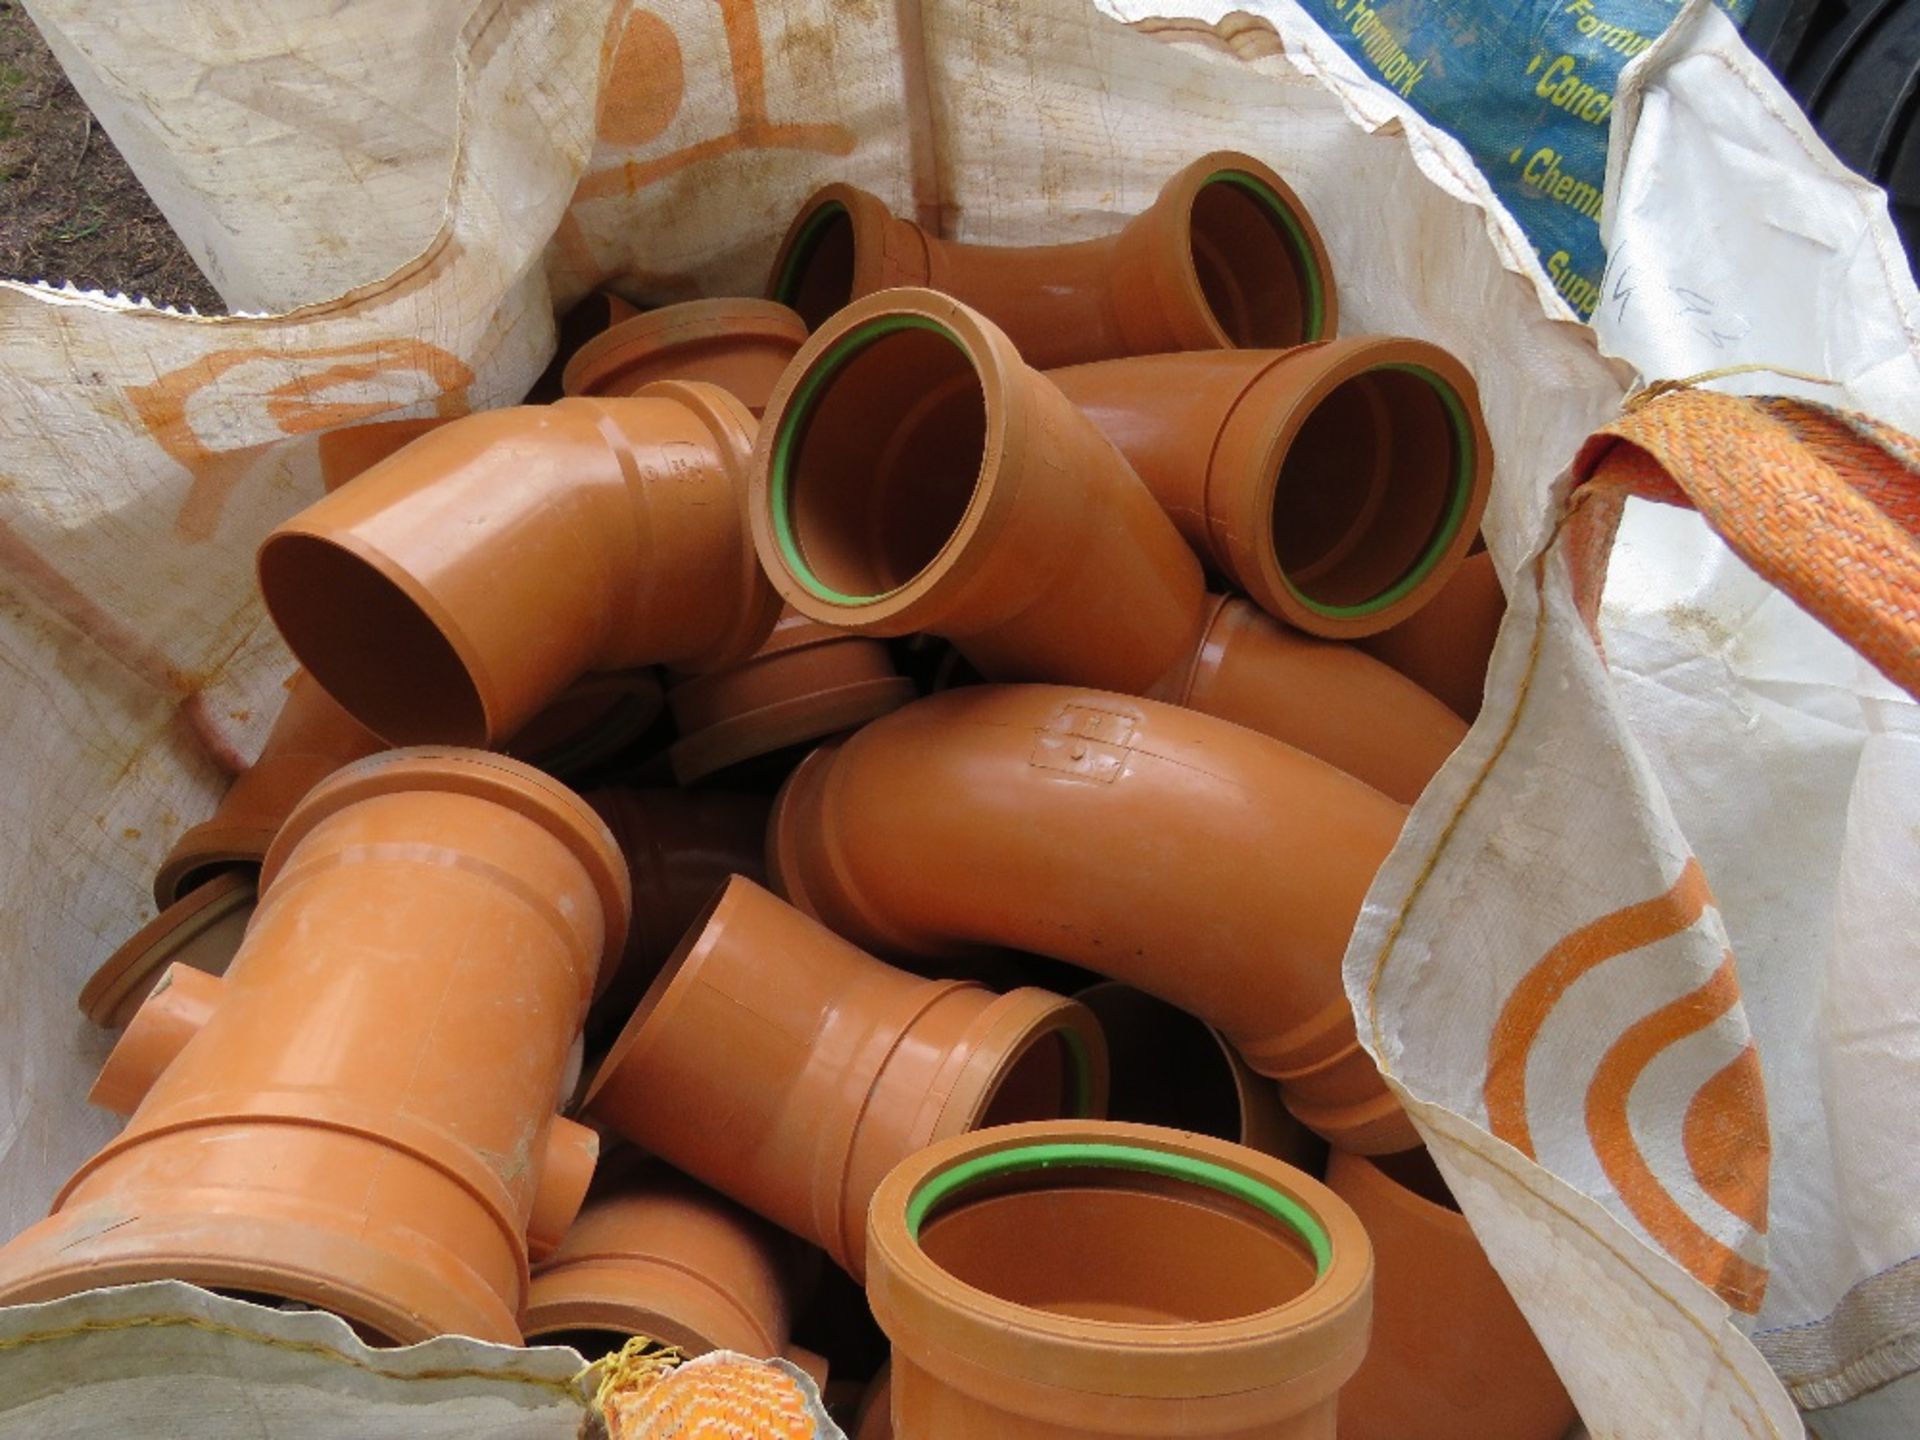 2 X BULK BAGS CONTAINING ASSORTED ORANGE PLASTIC DRAINAGE FITTINGS MAINLY 160MM. DIRECT FROM COMPANY - Image 4 of 5